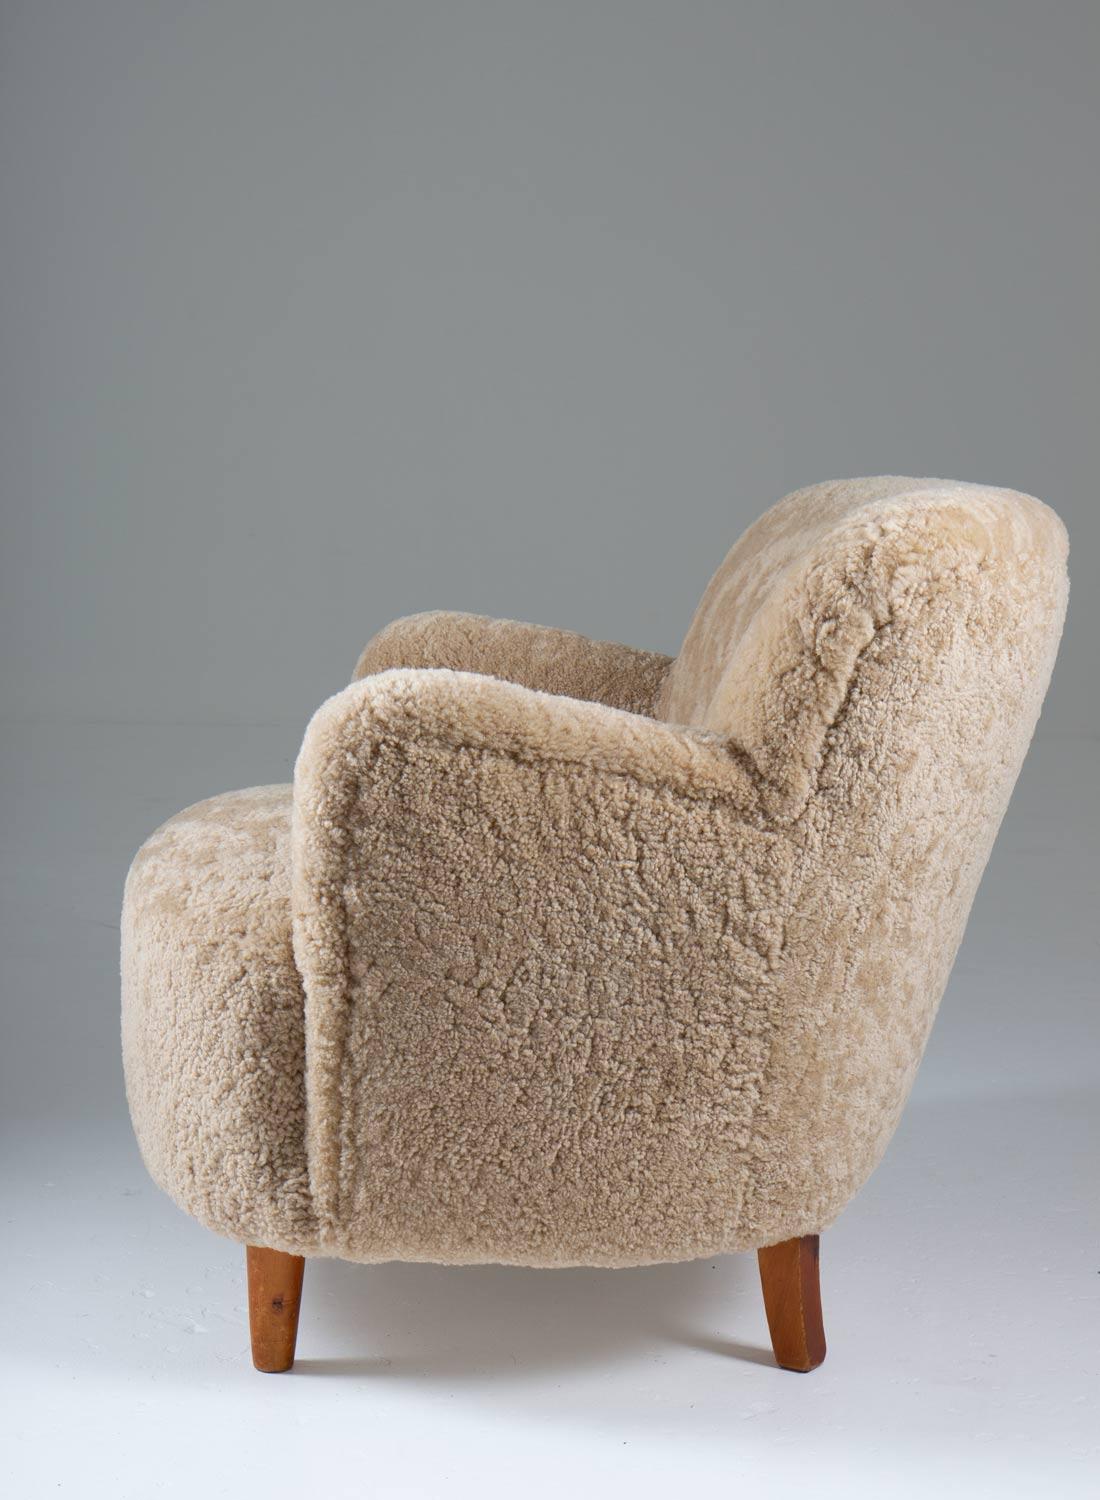 Scandinavian Mid Century Lounge Chairs in Sheepskin In Good Condition For Sale In Karlstad, SE